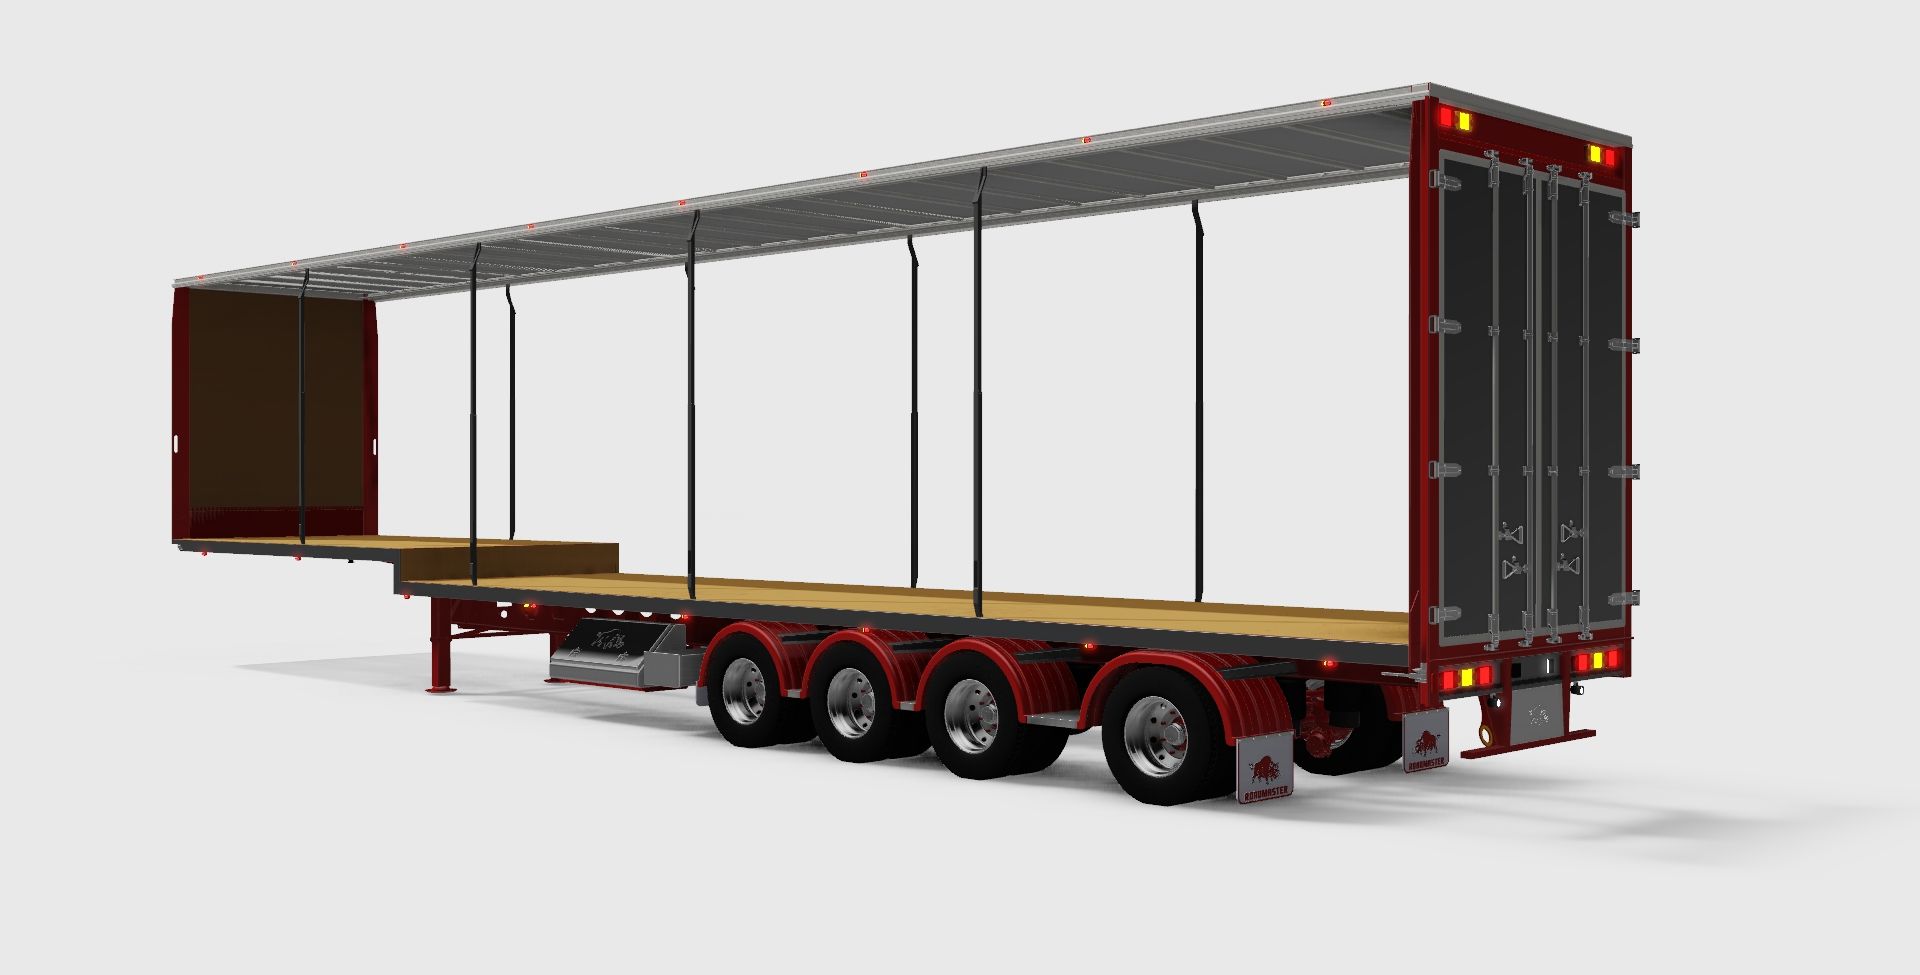 Rendering of a red roadmaster trailer with side curtains pulled back on white background 